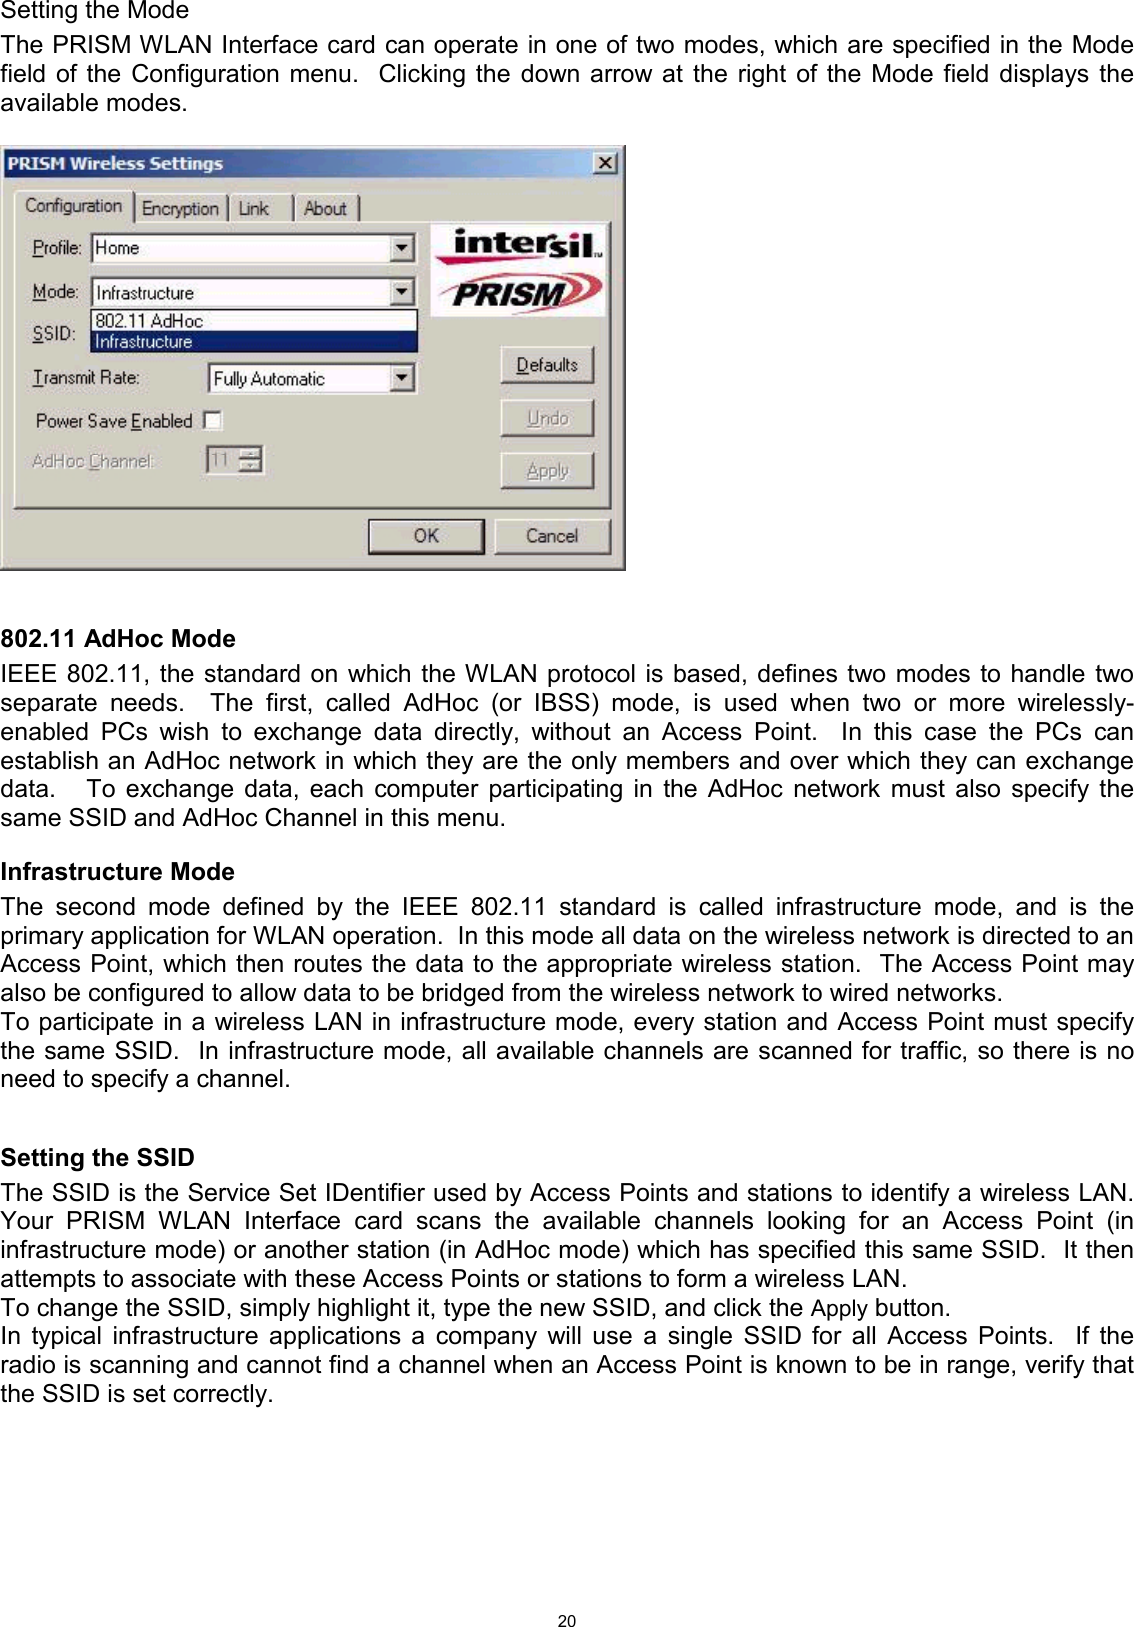 20Setting the ModeThe PRISM WLAN Interface card can operate in one of two modes, which are specified in the Modefield of the Configuration menu.  Clicking the down arrow at the right of the Mode field displays theavailable modes. 802.11 AdHoc ModeIEEE 802.11, the standard on which the WLAN protocol is based, defines two modes to handle twoseparate needs.  The first, called AdHoc (or IBSS) mode, is used when two or more wirelessly-enabled PCs wish to exchange data directly, without an Access Point.  In this case the PCs canestablish an AdHoc network in which they are the only members and over which they can exchangedata.   To exchange data, each computer participating in the AdHoc network must also specify thesame SSID and AdHoc Channel in this menu.Infrastructure ModeThe second mode defined by the IEEE 802.11 standard is called infrastructure mode, and is theprimary application for WLAN operation.  In this mode all data on the wireless network is directed to anAccess Point, which then routes the data to the appropriate wireless station.  The Access Point mayalso be configured to allow data to be bridged from the wireless network to wired networks.To participate in a wireless LAN in infrastructure mode, every station and Access Point must specifythe same SSID.  In infrastructure mode, all available channels are scanned for traffic, so there is noneed to specify a channel.Setting the SSIDThe SSID is the Service Set IDentifier used by Access Points and stations to identify a wireless LAN.Your PRISM WLAN Interface card scans the available channels looking for an Access Point (ininfrastructure mode) or another station (in AdHoc mode) which has specified this same SSID.  It thenattempts to associate with these Access Points or stations to form a wireless LAN.To change the SSID, simply highlight it, type the new SSID, and click the Apply button.In typical infrastructure applications a company will use a single SSID for all Access Points.  If theradio is scanning and cannot find a channel when an Access Point is known to be in range, verify thatthe SSID is set correctly.